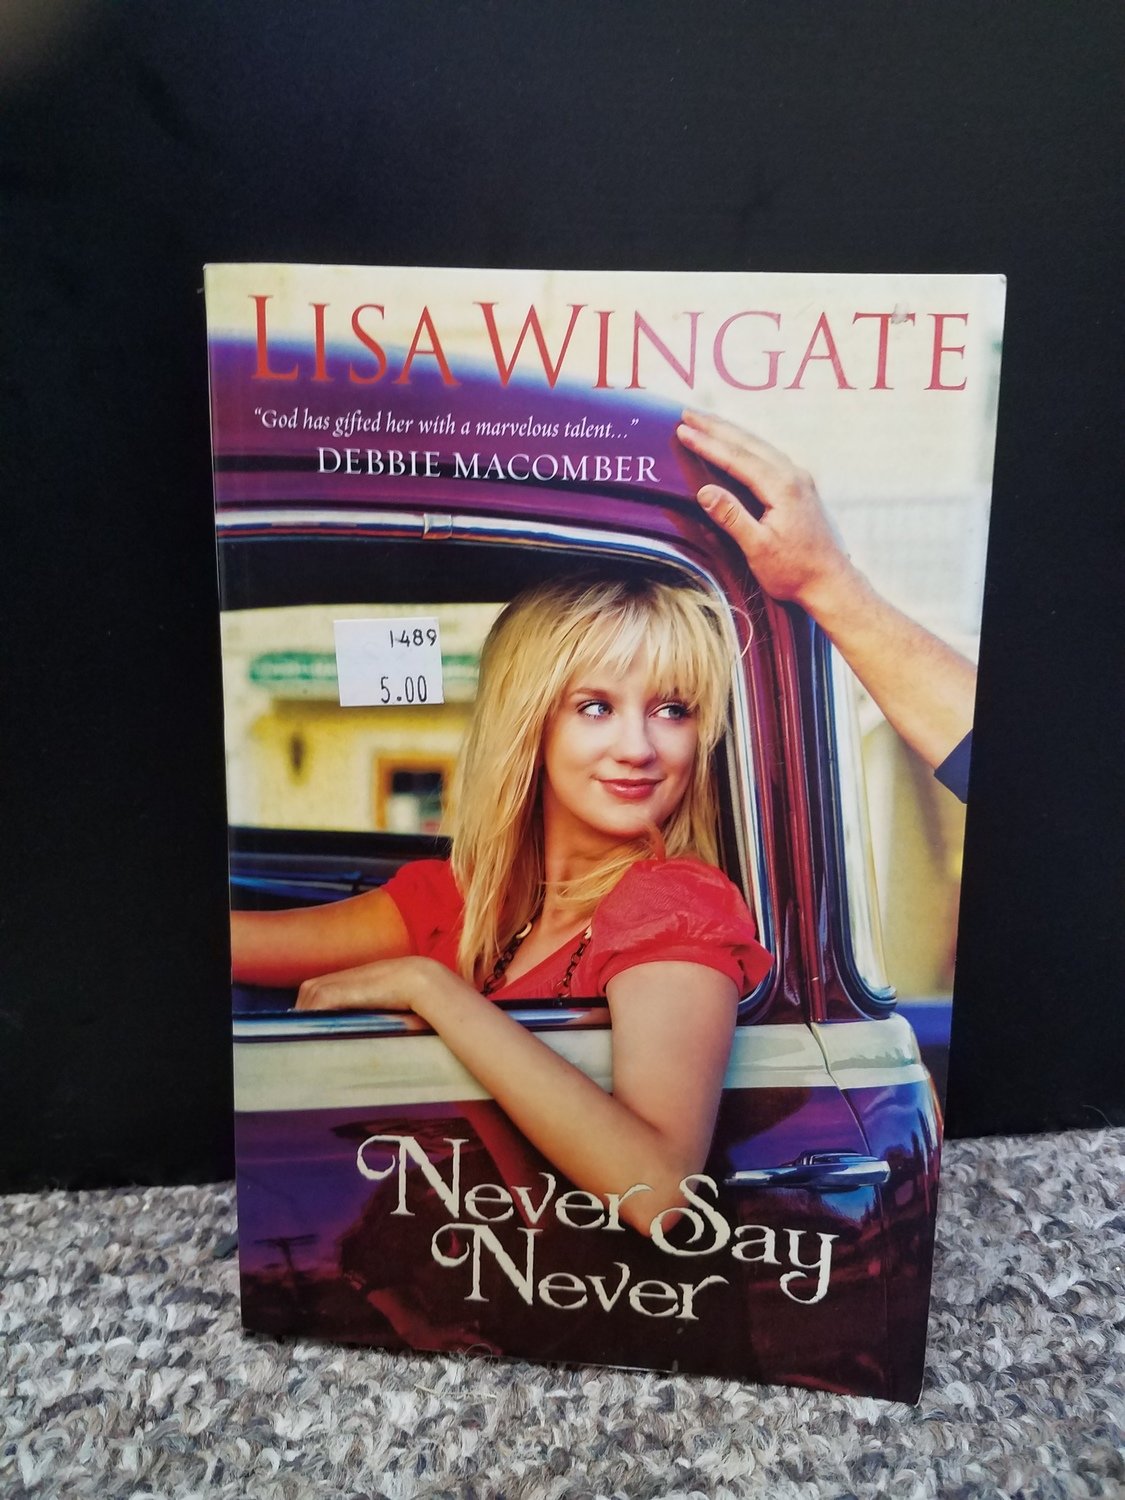 Never Say Never by Lisa Wingate